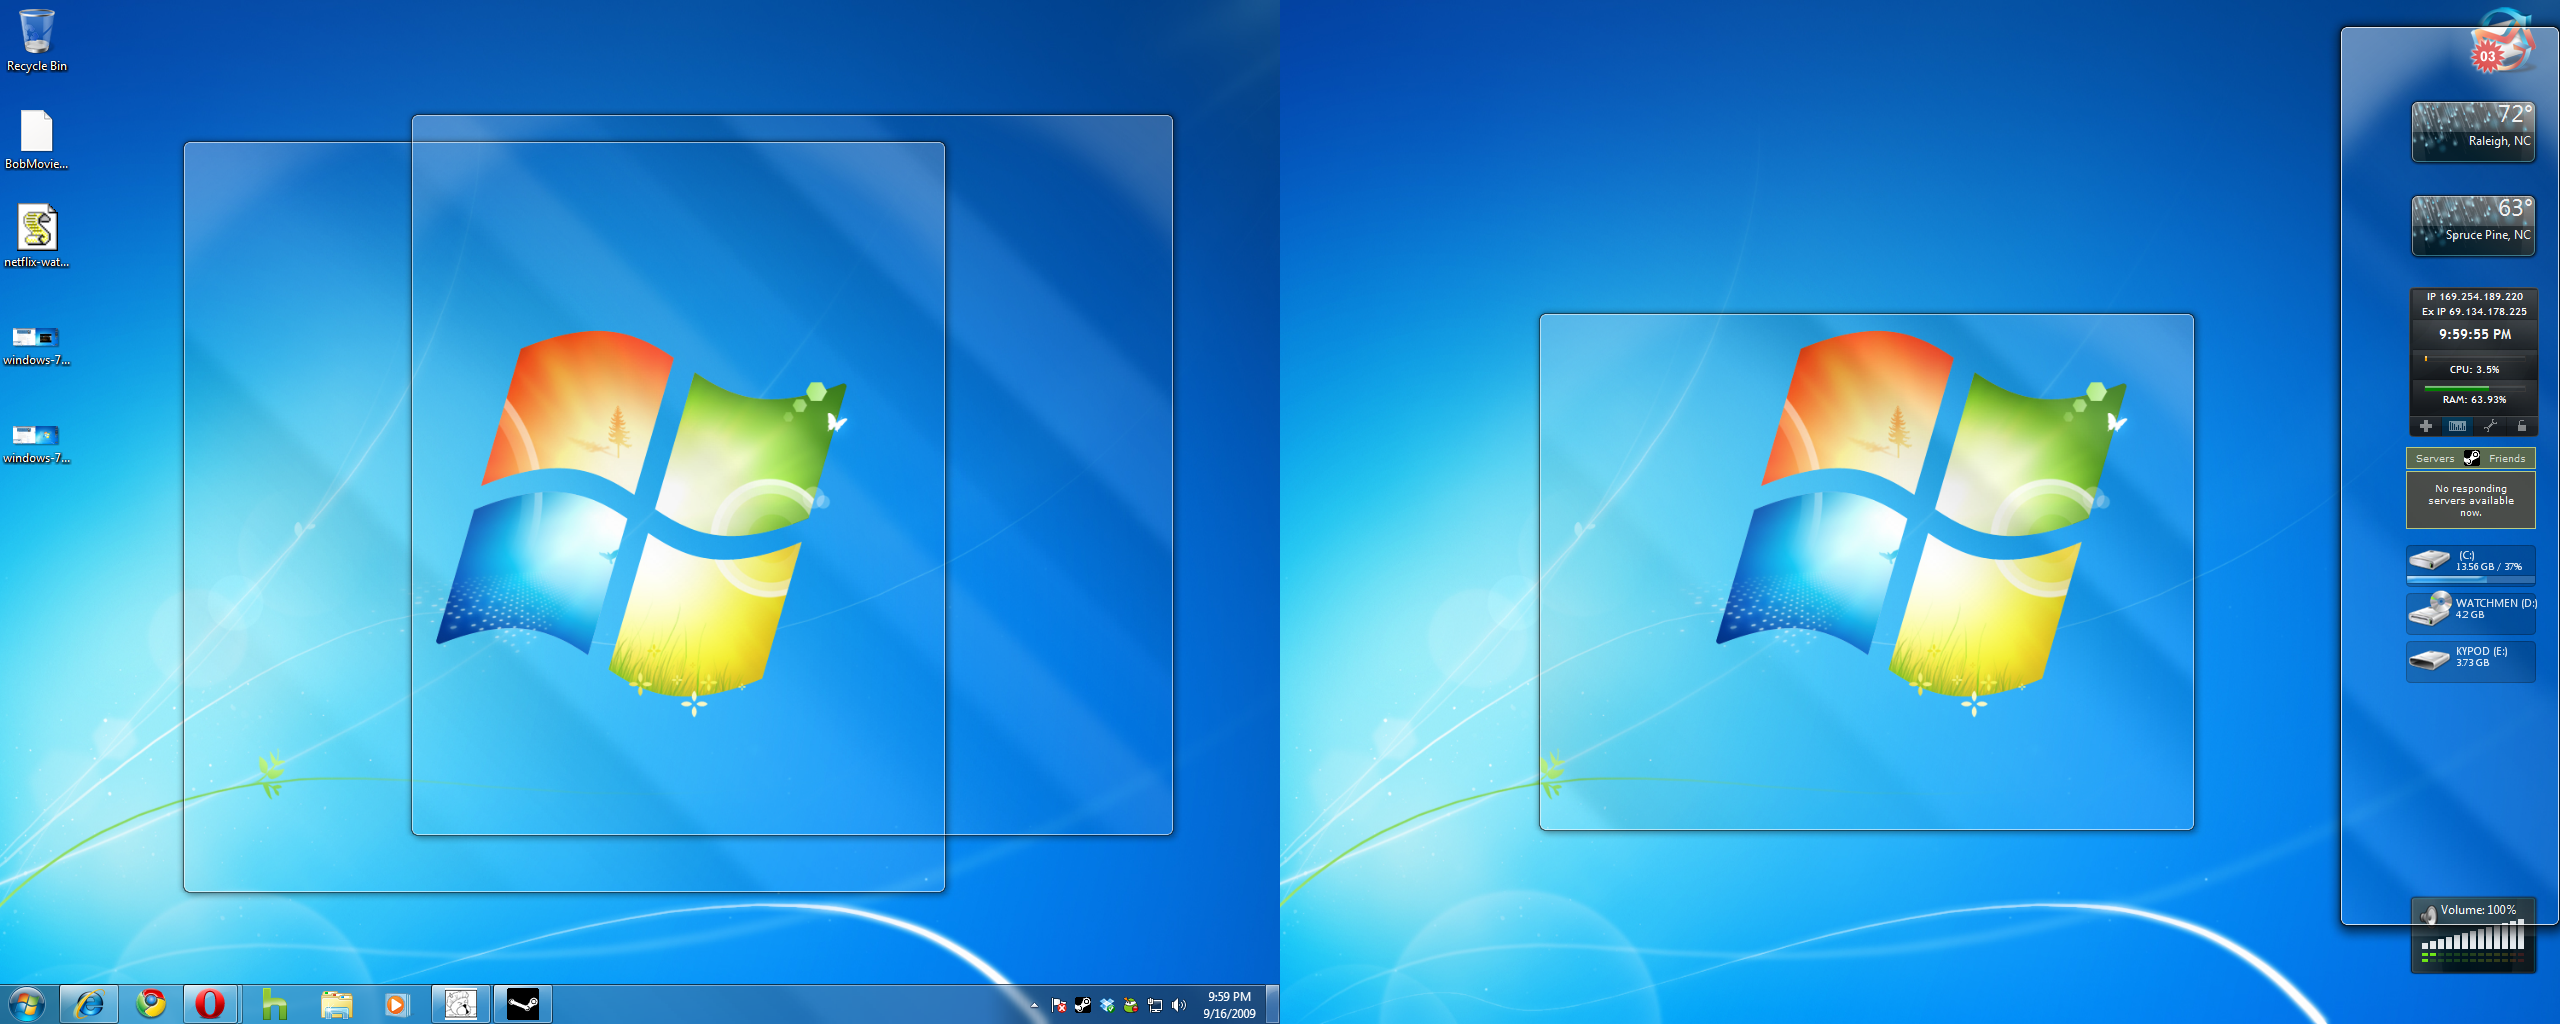 preview on windows 7 definition